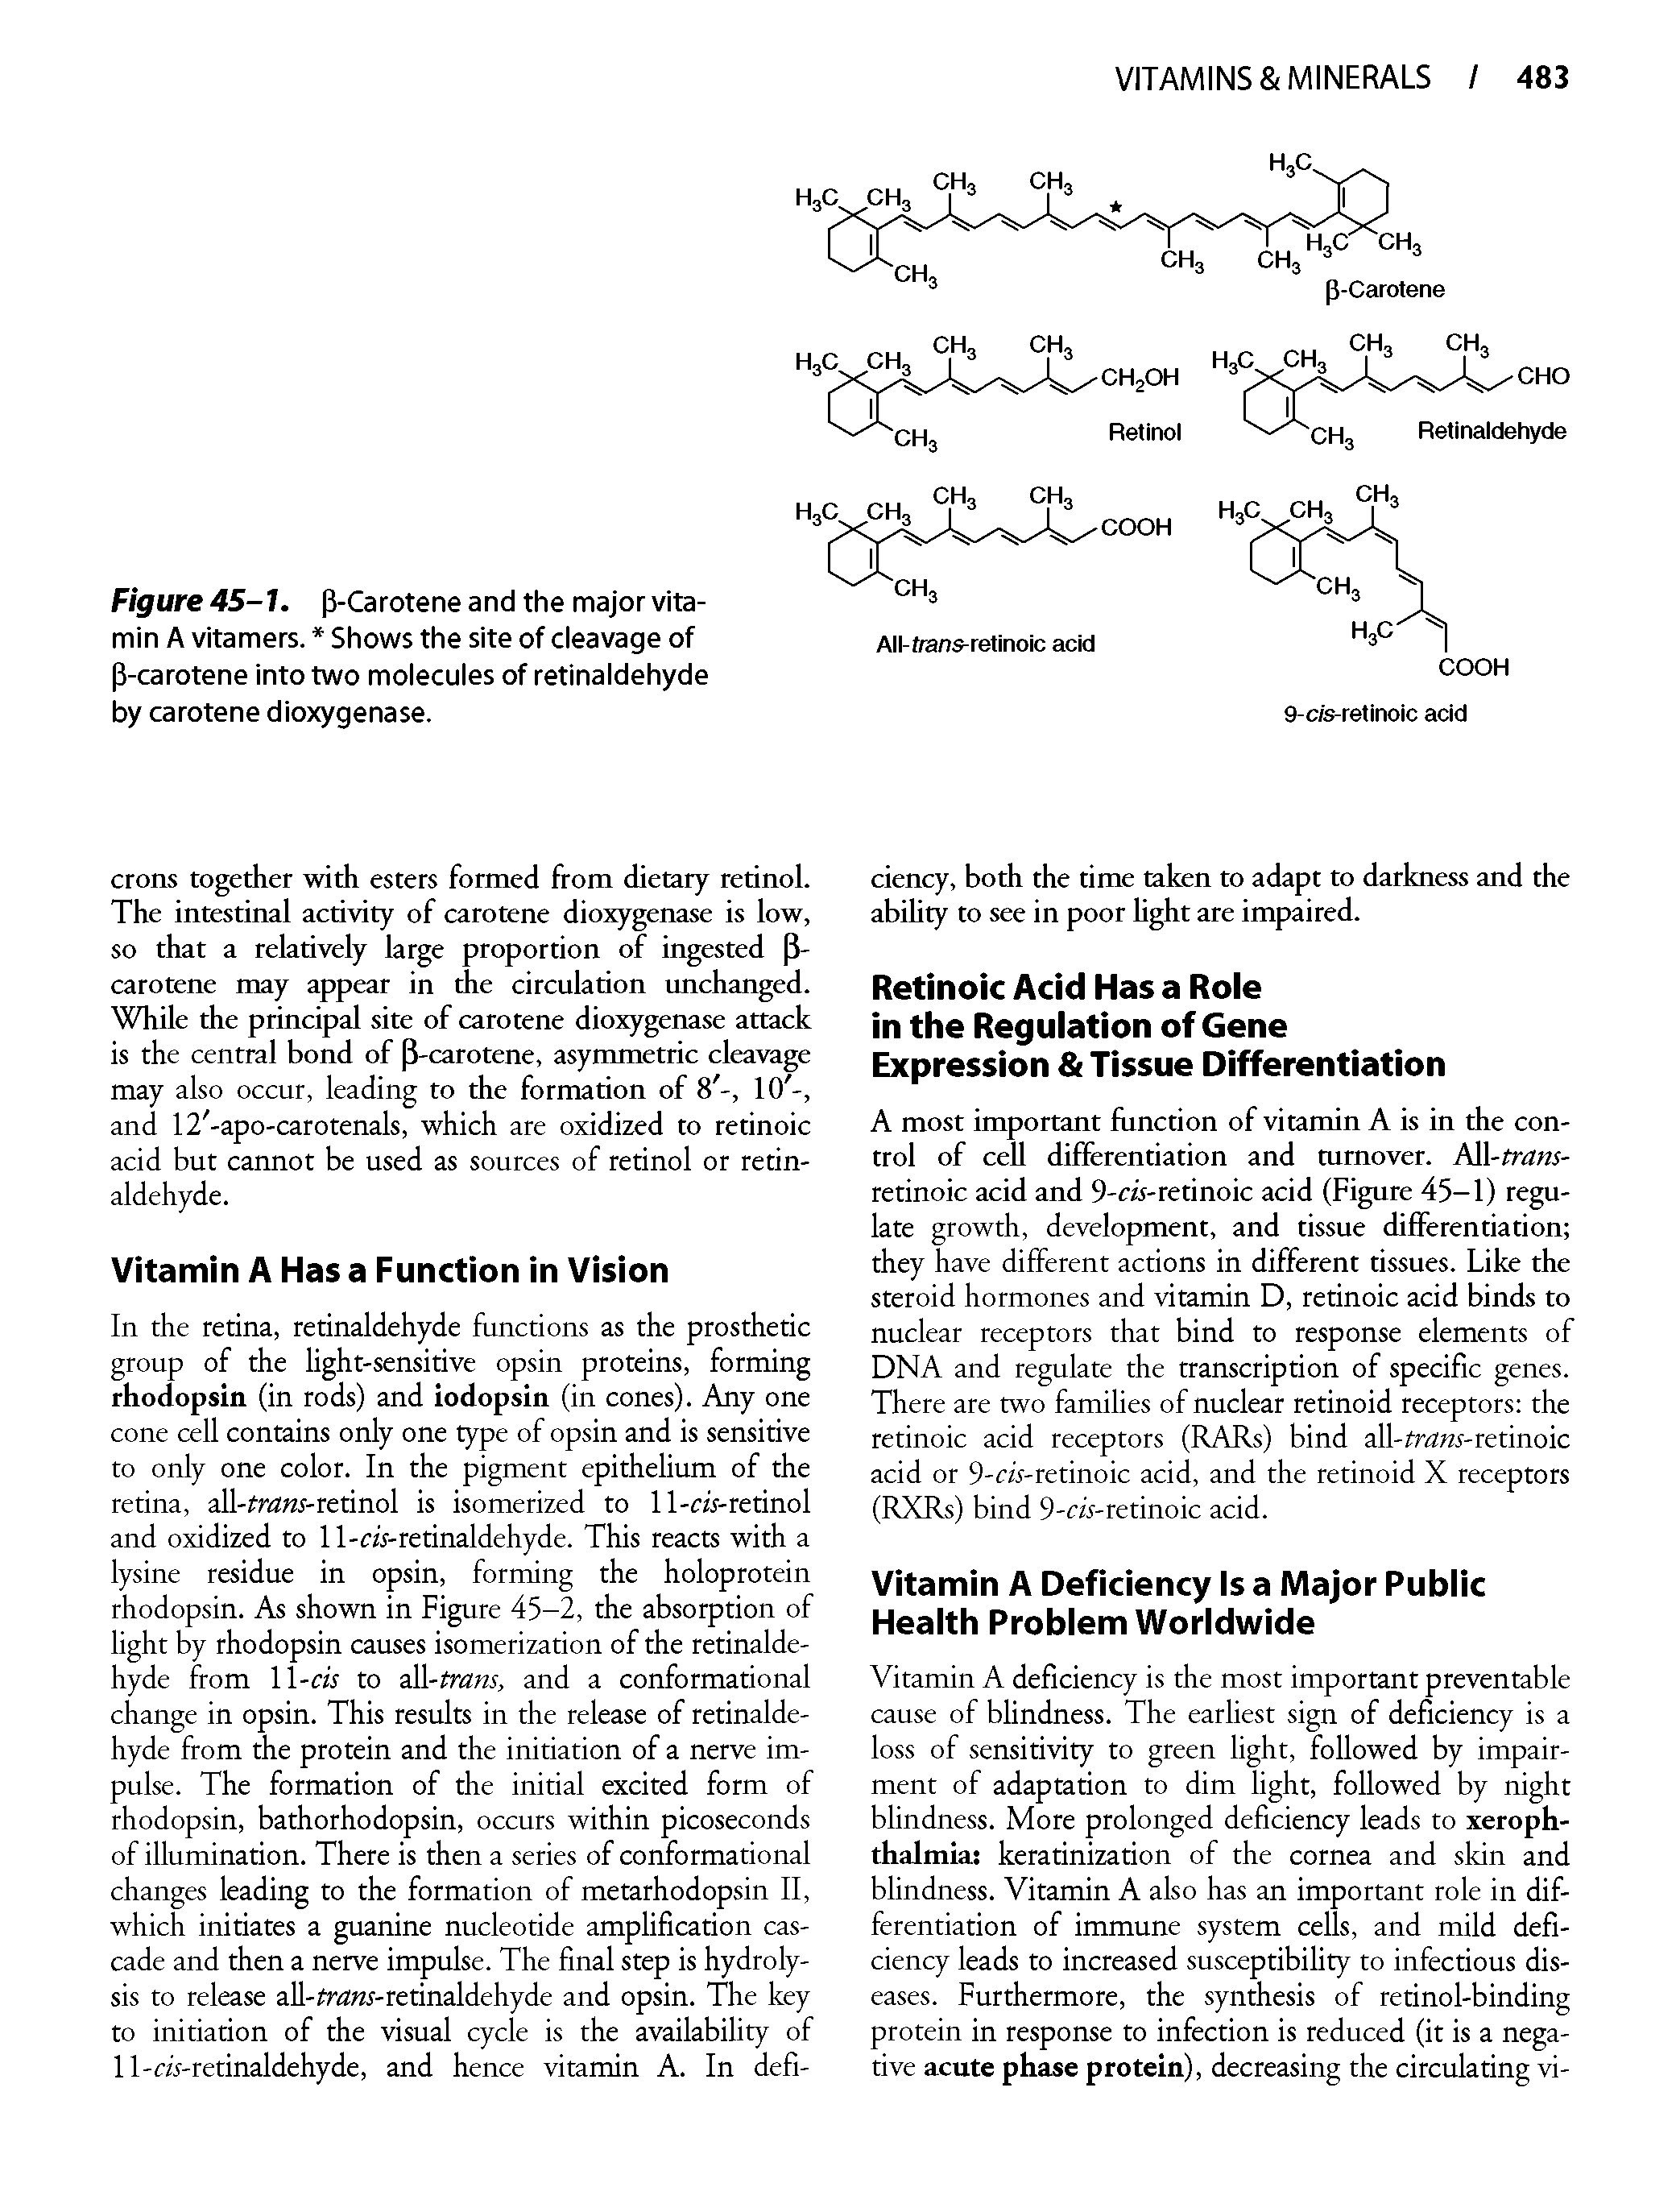 Figure 45-1. P-Carotene and the major vitamin A vitamers. Shows the site of cleavage of P-carotene into two molecules of retinaldehyde by carotene dioxygenase.